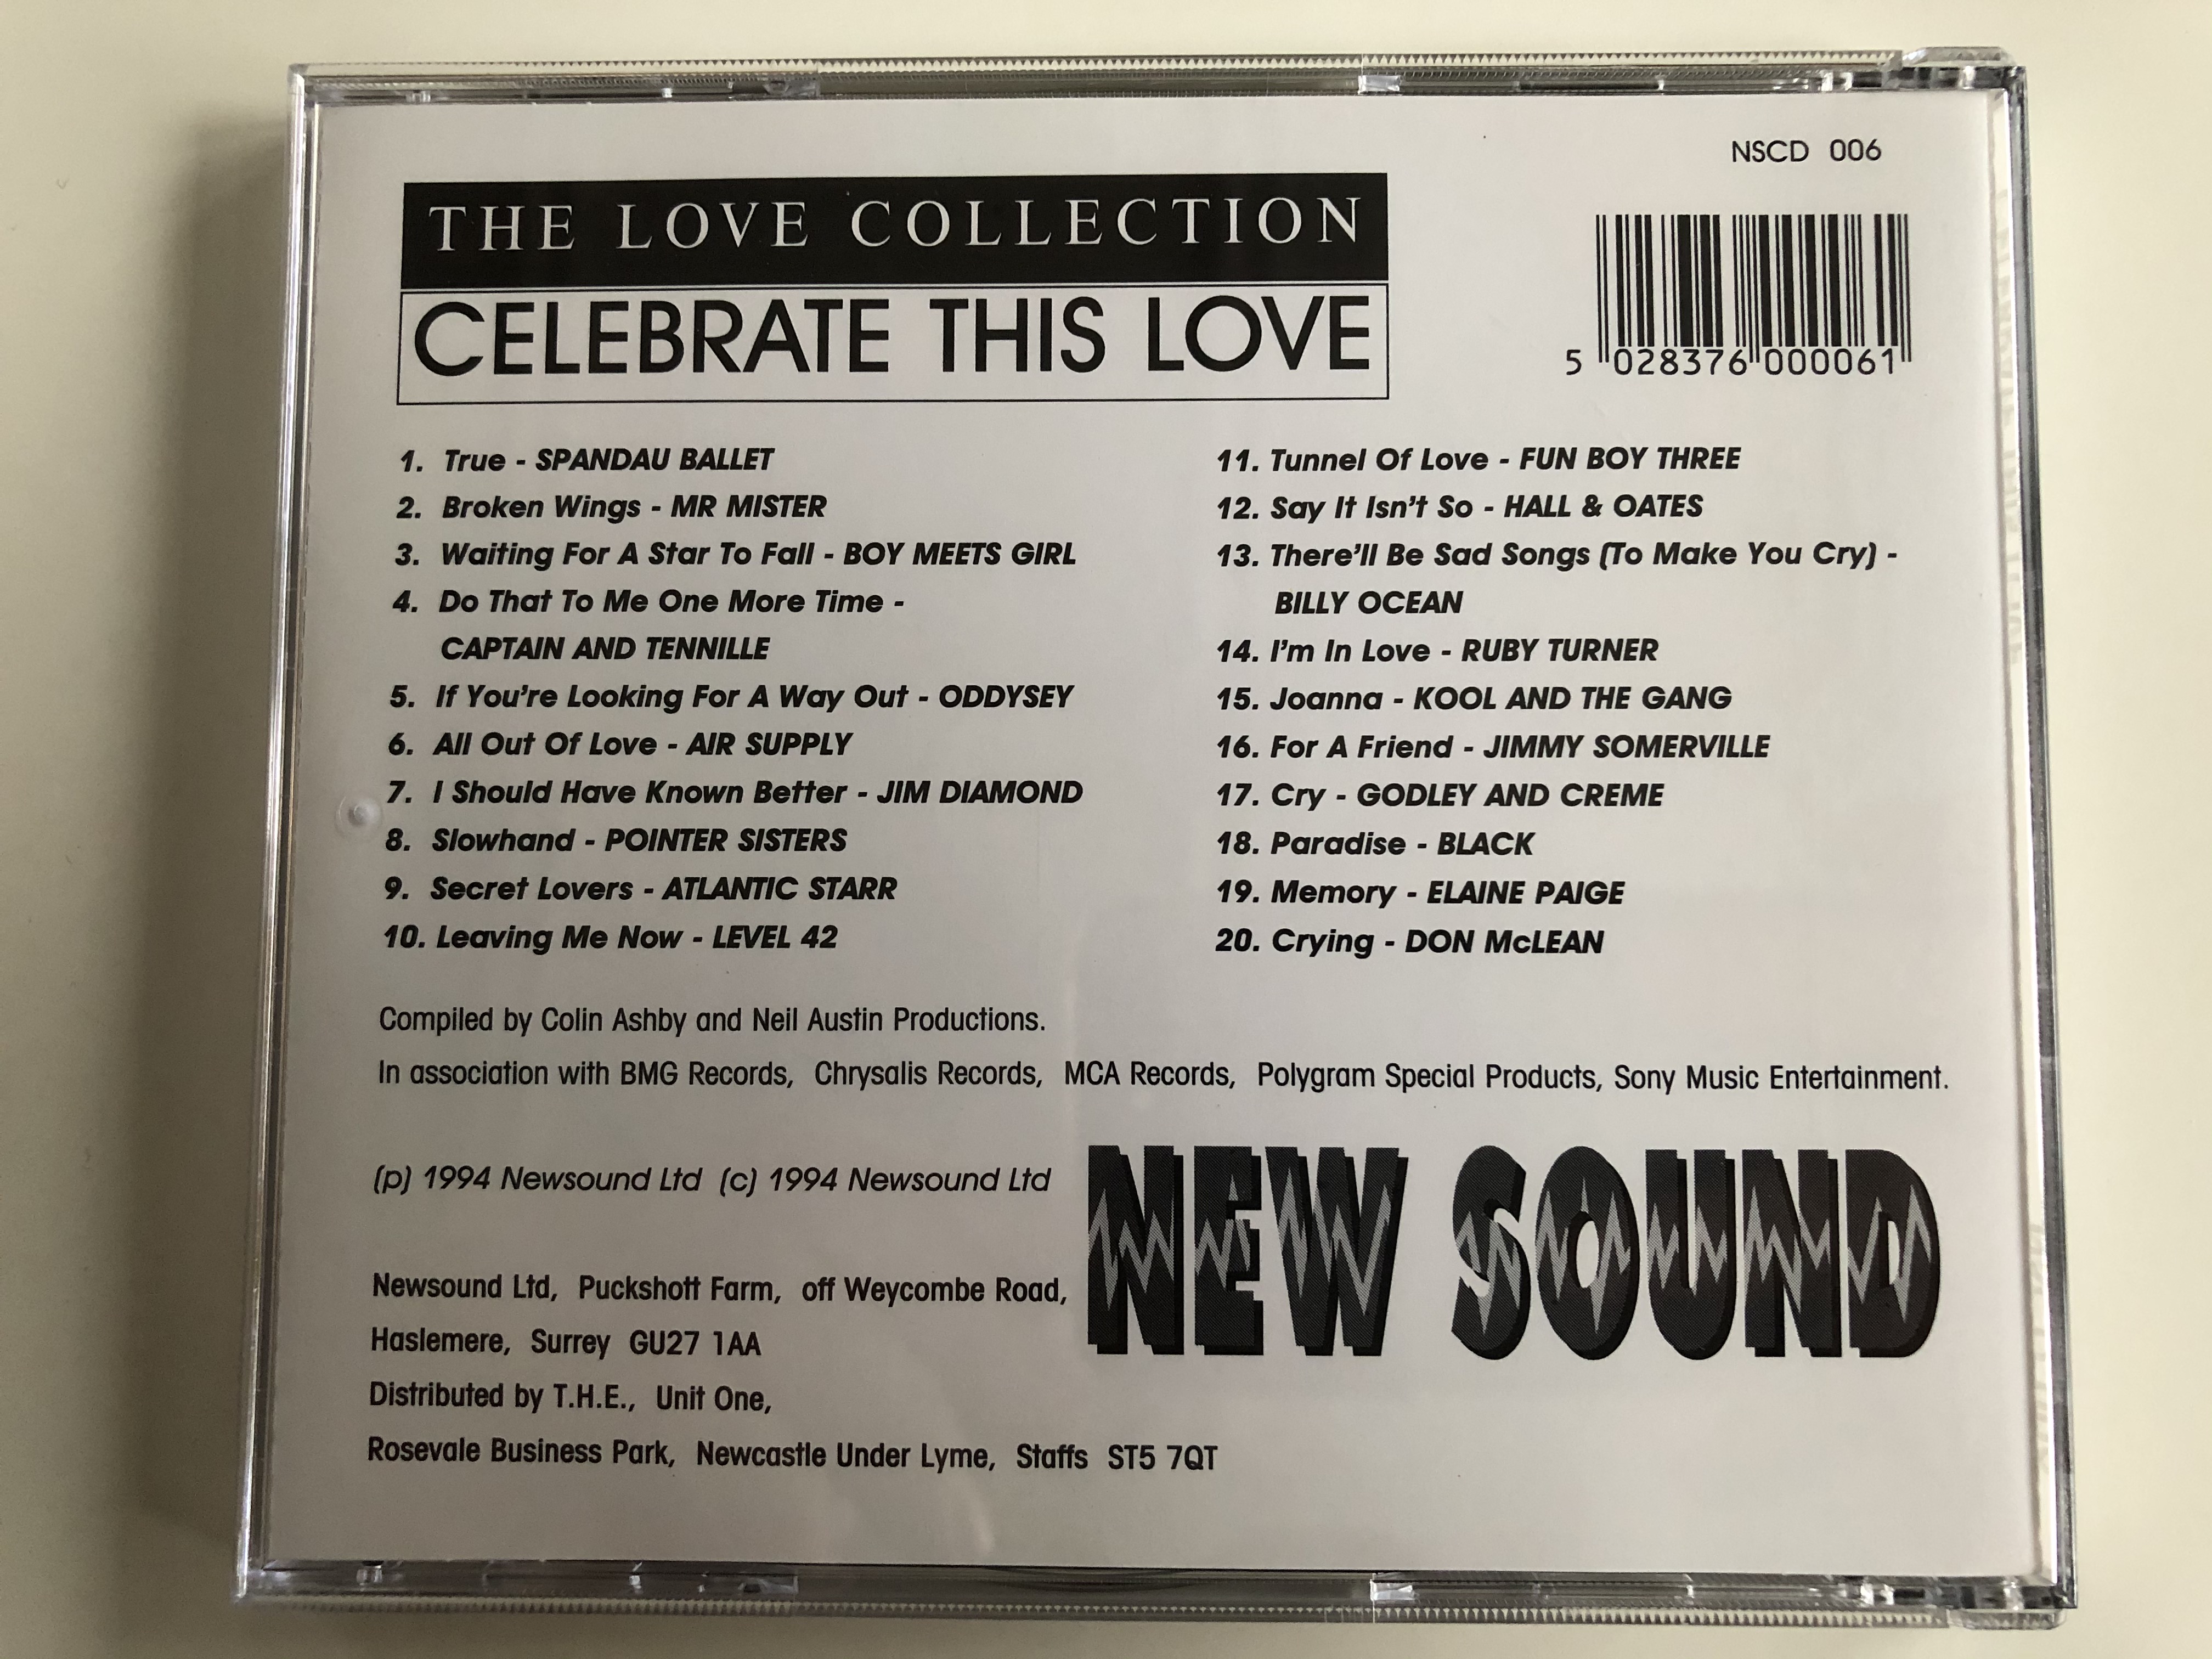 the-love-collection-vol.-4-celebrate-this-love-20-great-tracks-original-artists-there-ll-be-sad-songs-billy-ocean-broken-wings-mr.-mister-all-out-of-love-air-supply-true-spa-4-.jpg